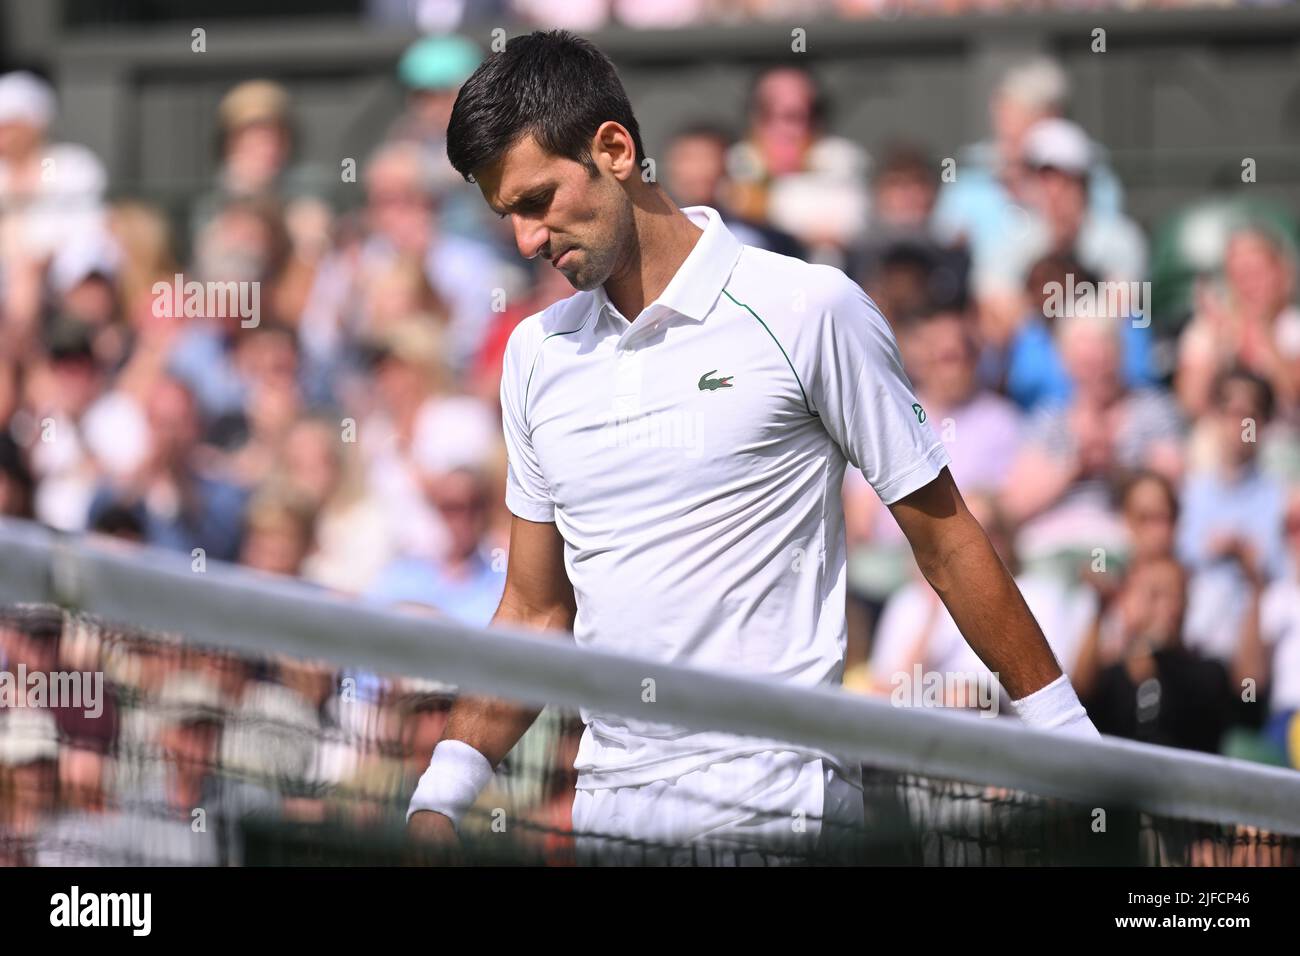 01 July 2022. London, United Kingdom.  Novak Djokovic of Serbia plays Miomir Kecmanovic of Serbia in the 3rd round of the men’s singles Wimbledon Tennis Championships on the day 5 of the Wimbledon Tennis Championships held at the All England Lawn Tennis and Croquet Club Photo by Ray Tang. Stock Photo